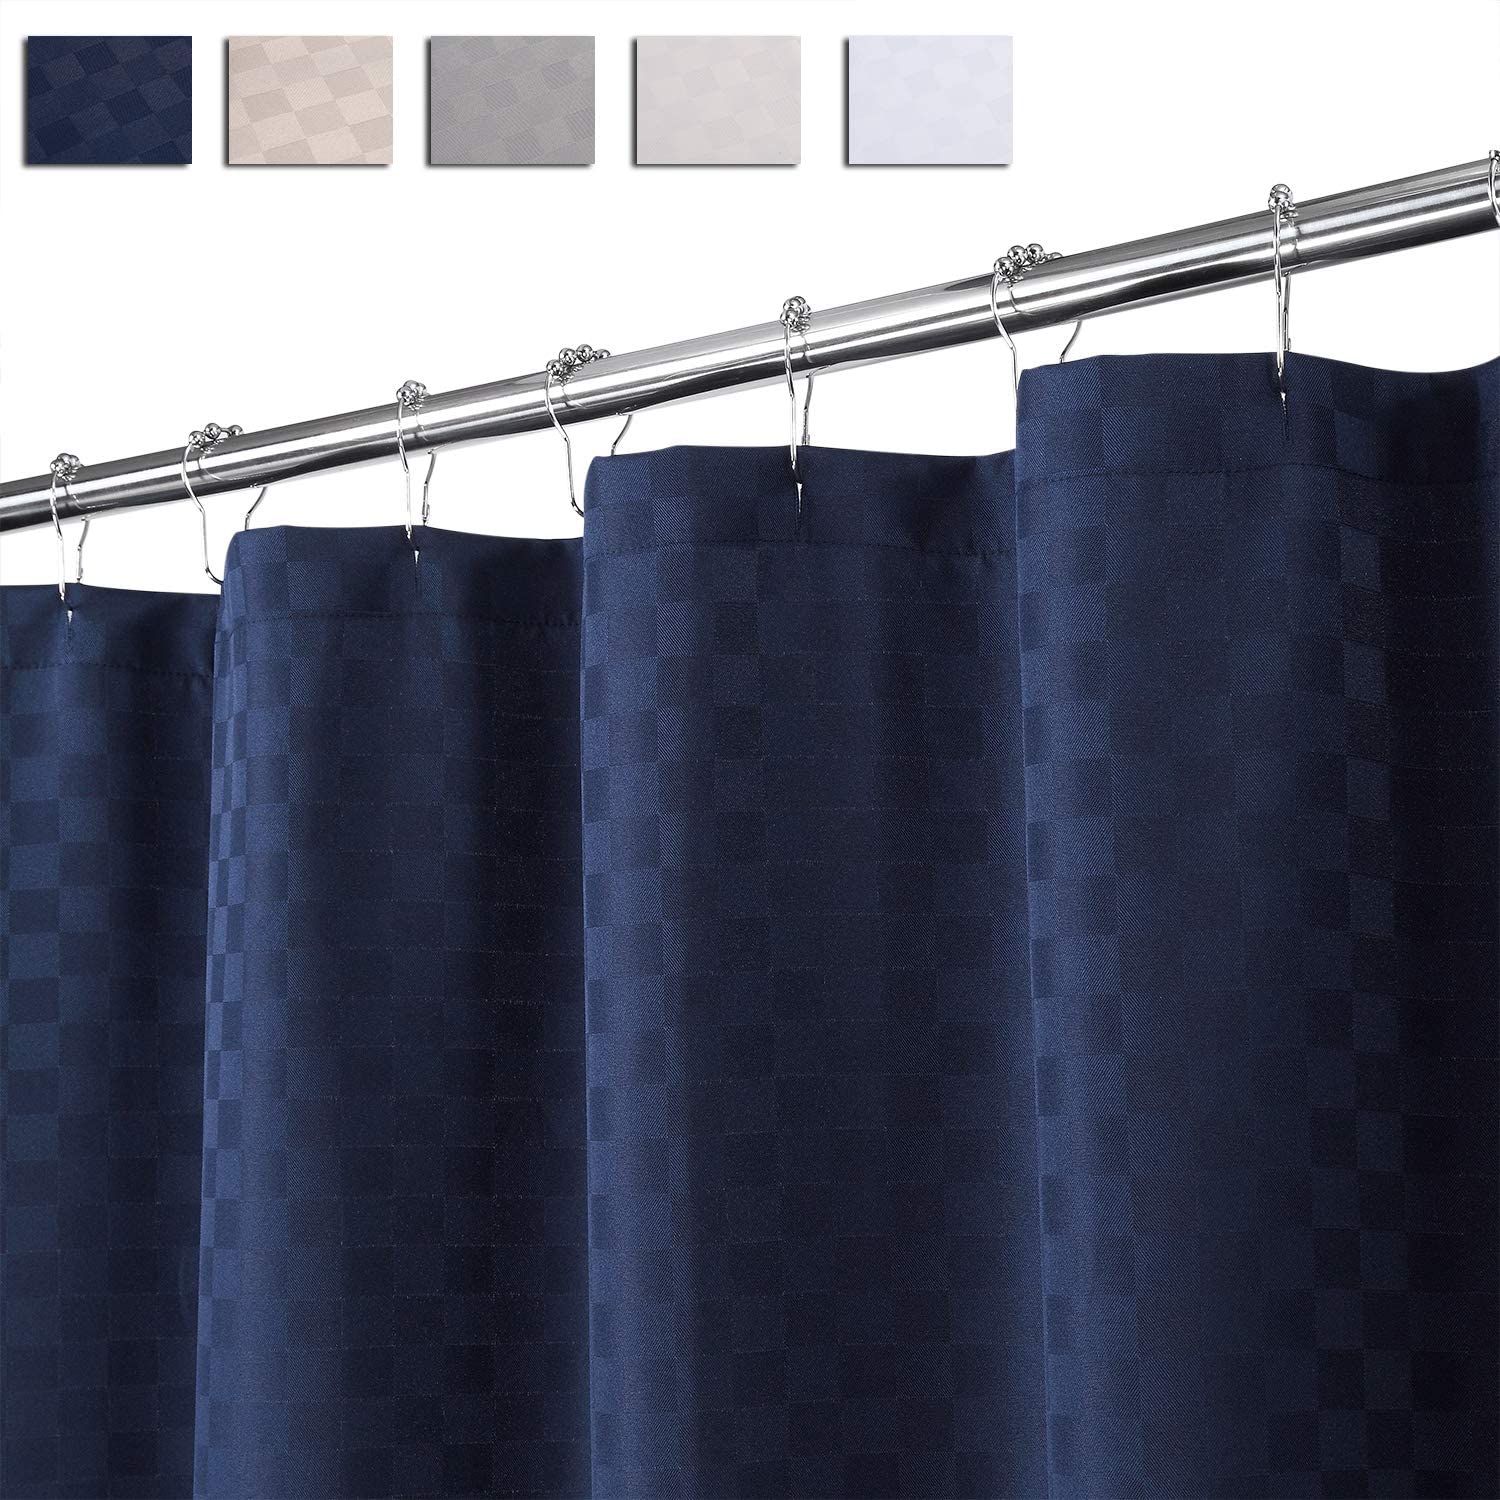 72x84 Inch Hotel Luxury 190GSM Heavy Weight Polyester Bath Shower Curtain Navy Blue 180x210 cm Extra Long Shower Curtain Navy Blue 